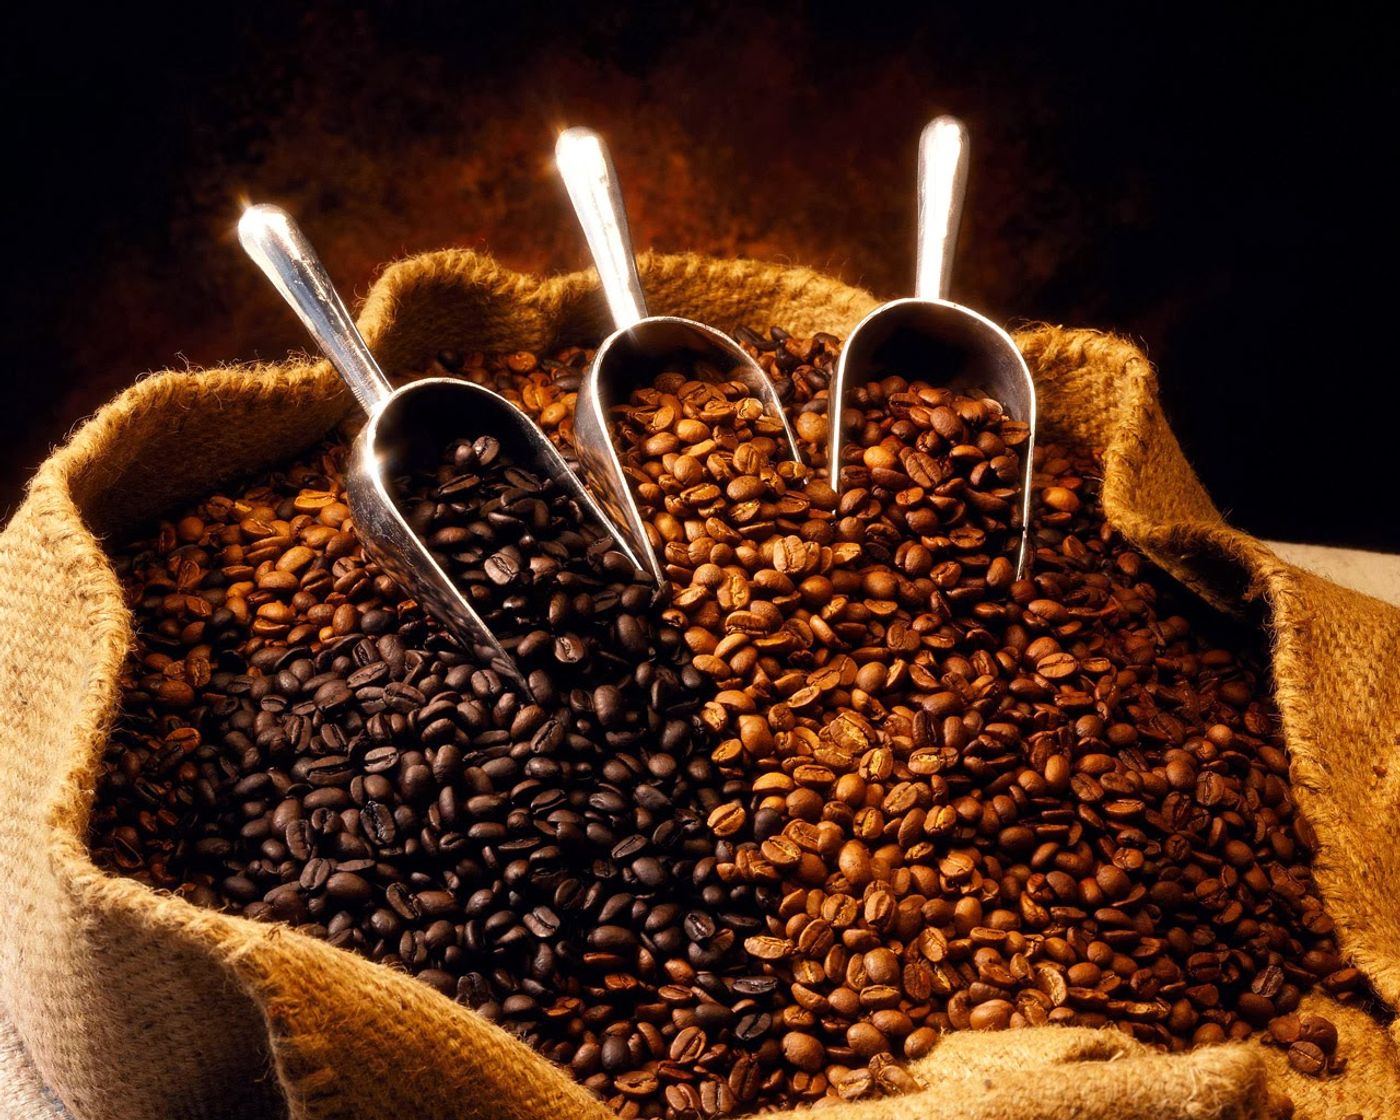 Coffee tends to lessen effects of inflammatory pathways